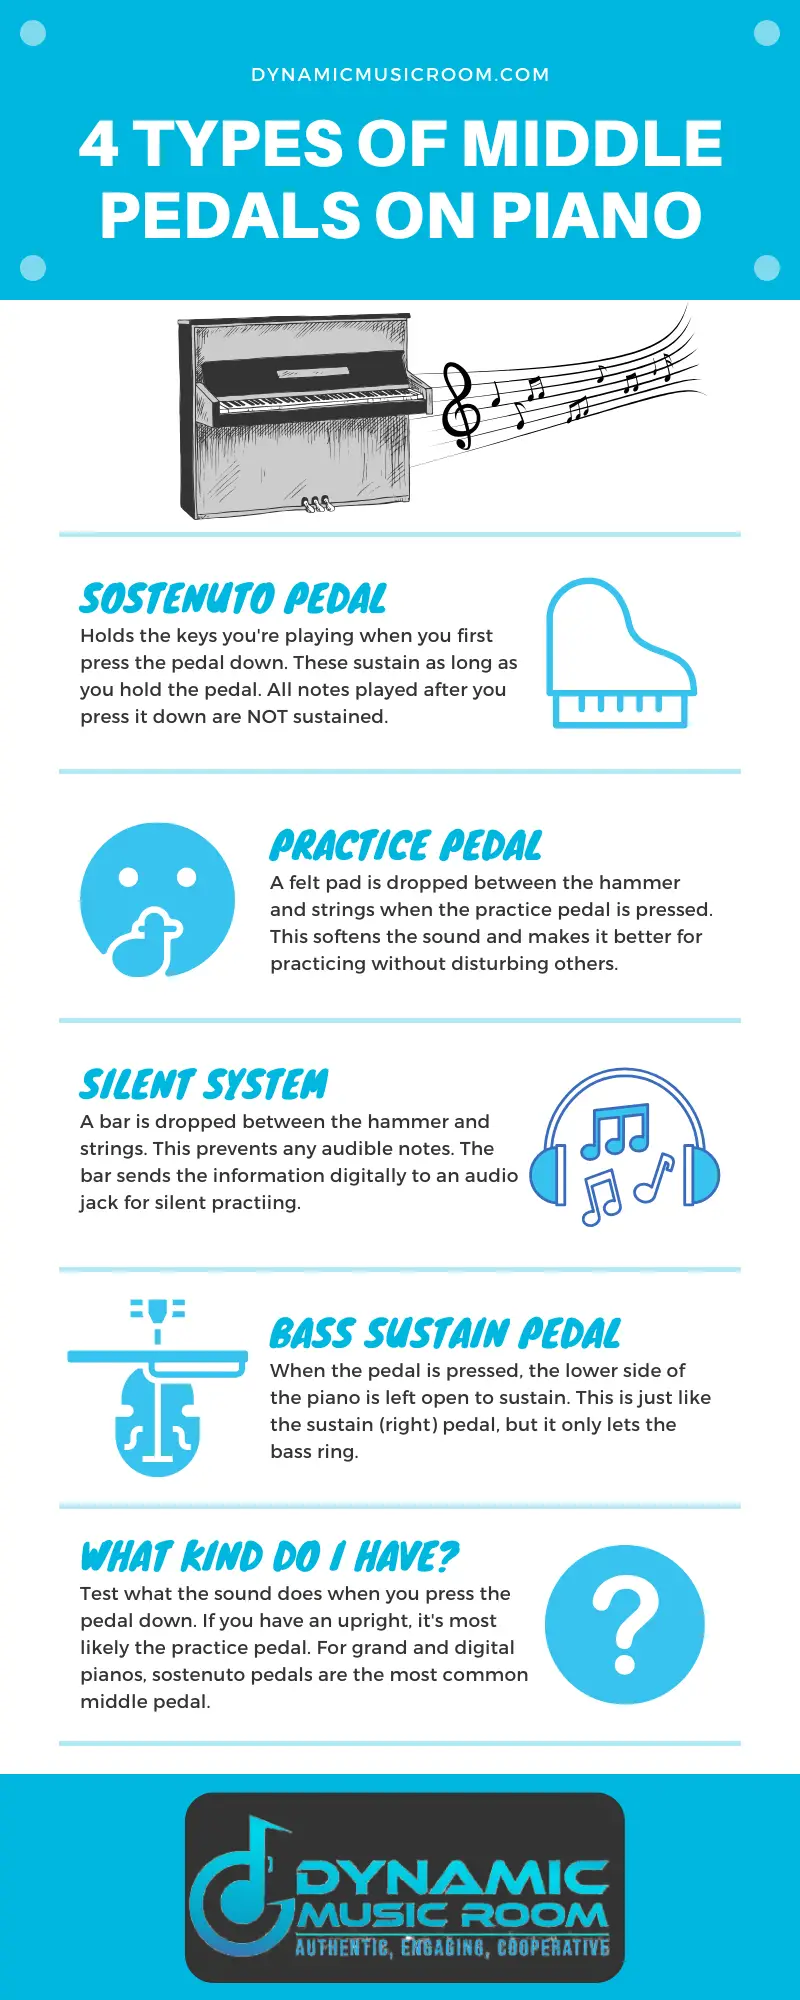 image 4 types of middle pedals on piano infographic